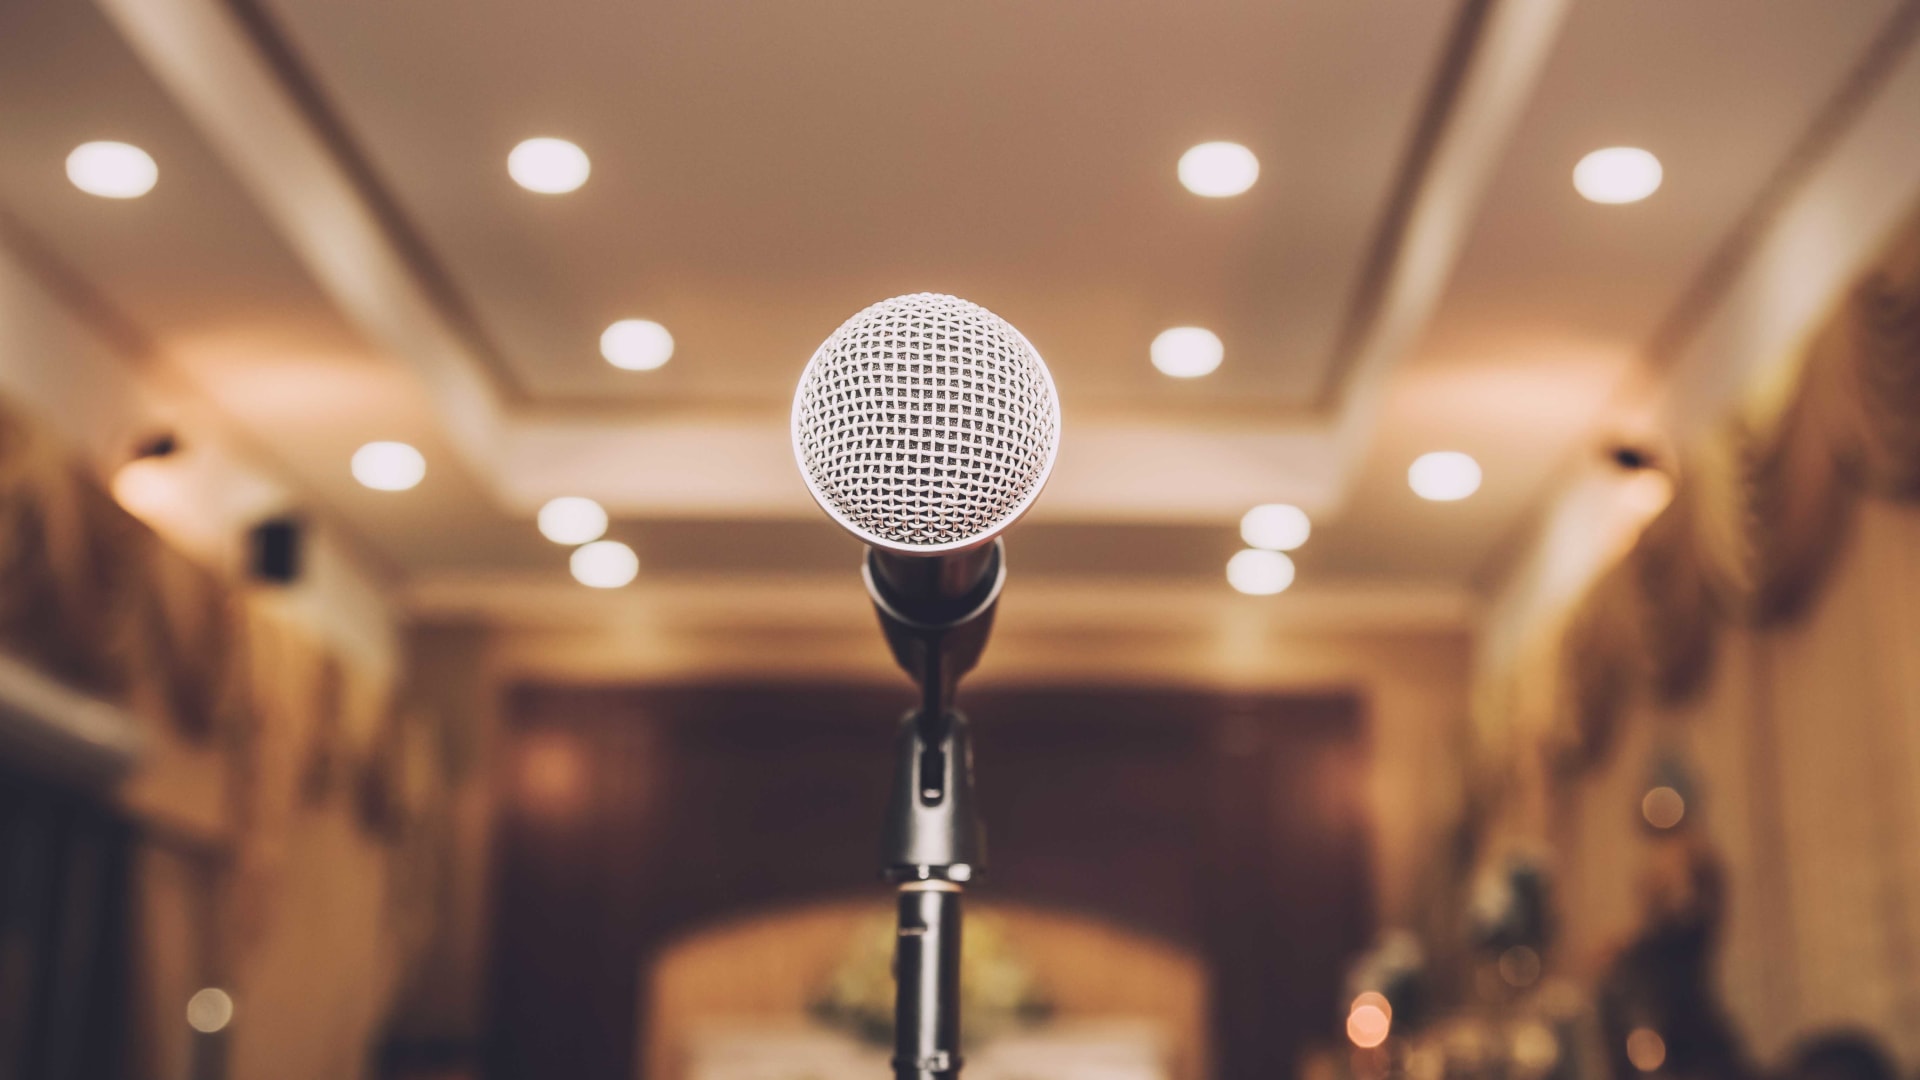 A Simple 3-Part Strategy to Conquer the Fear of Public Speaking